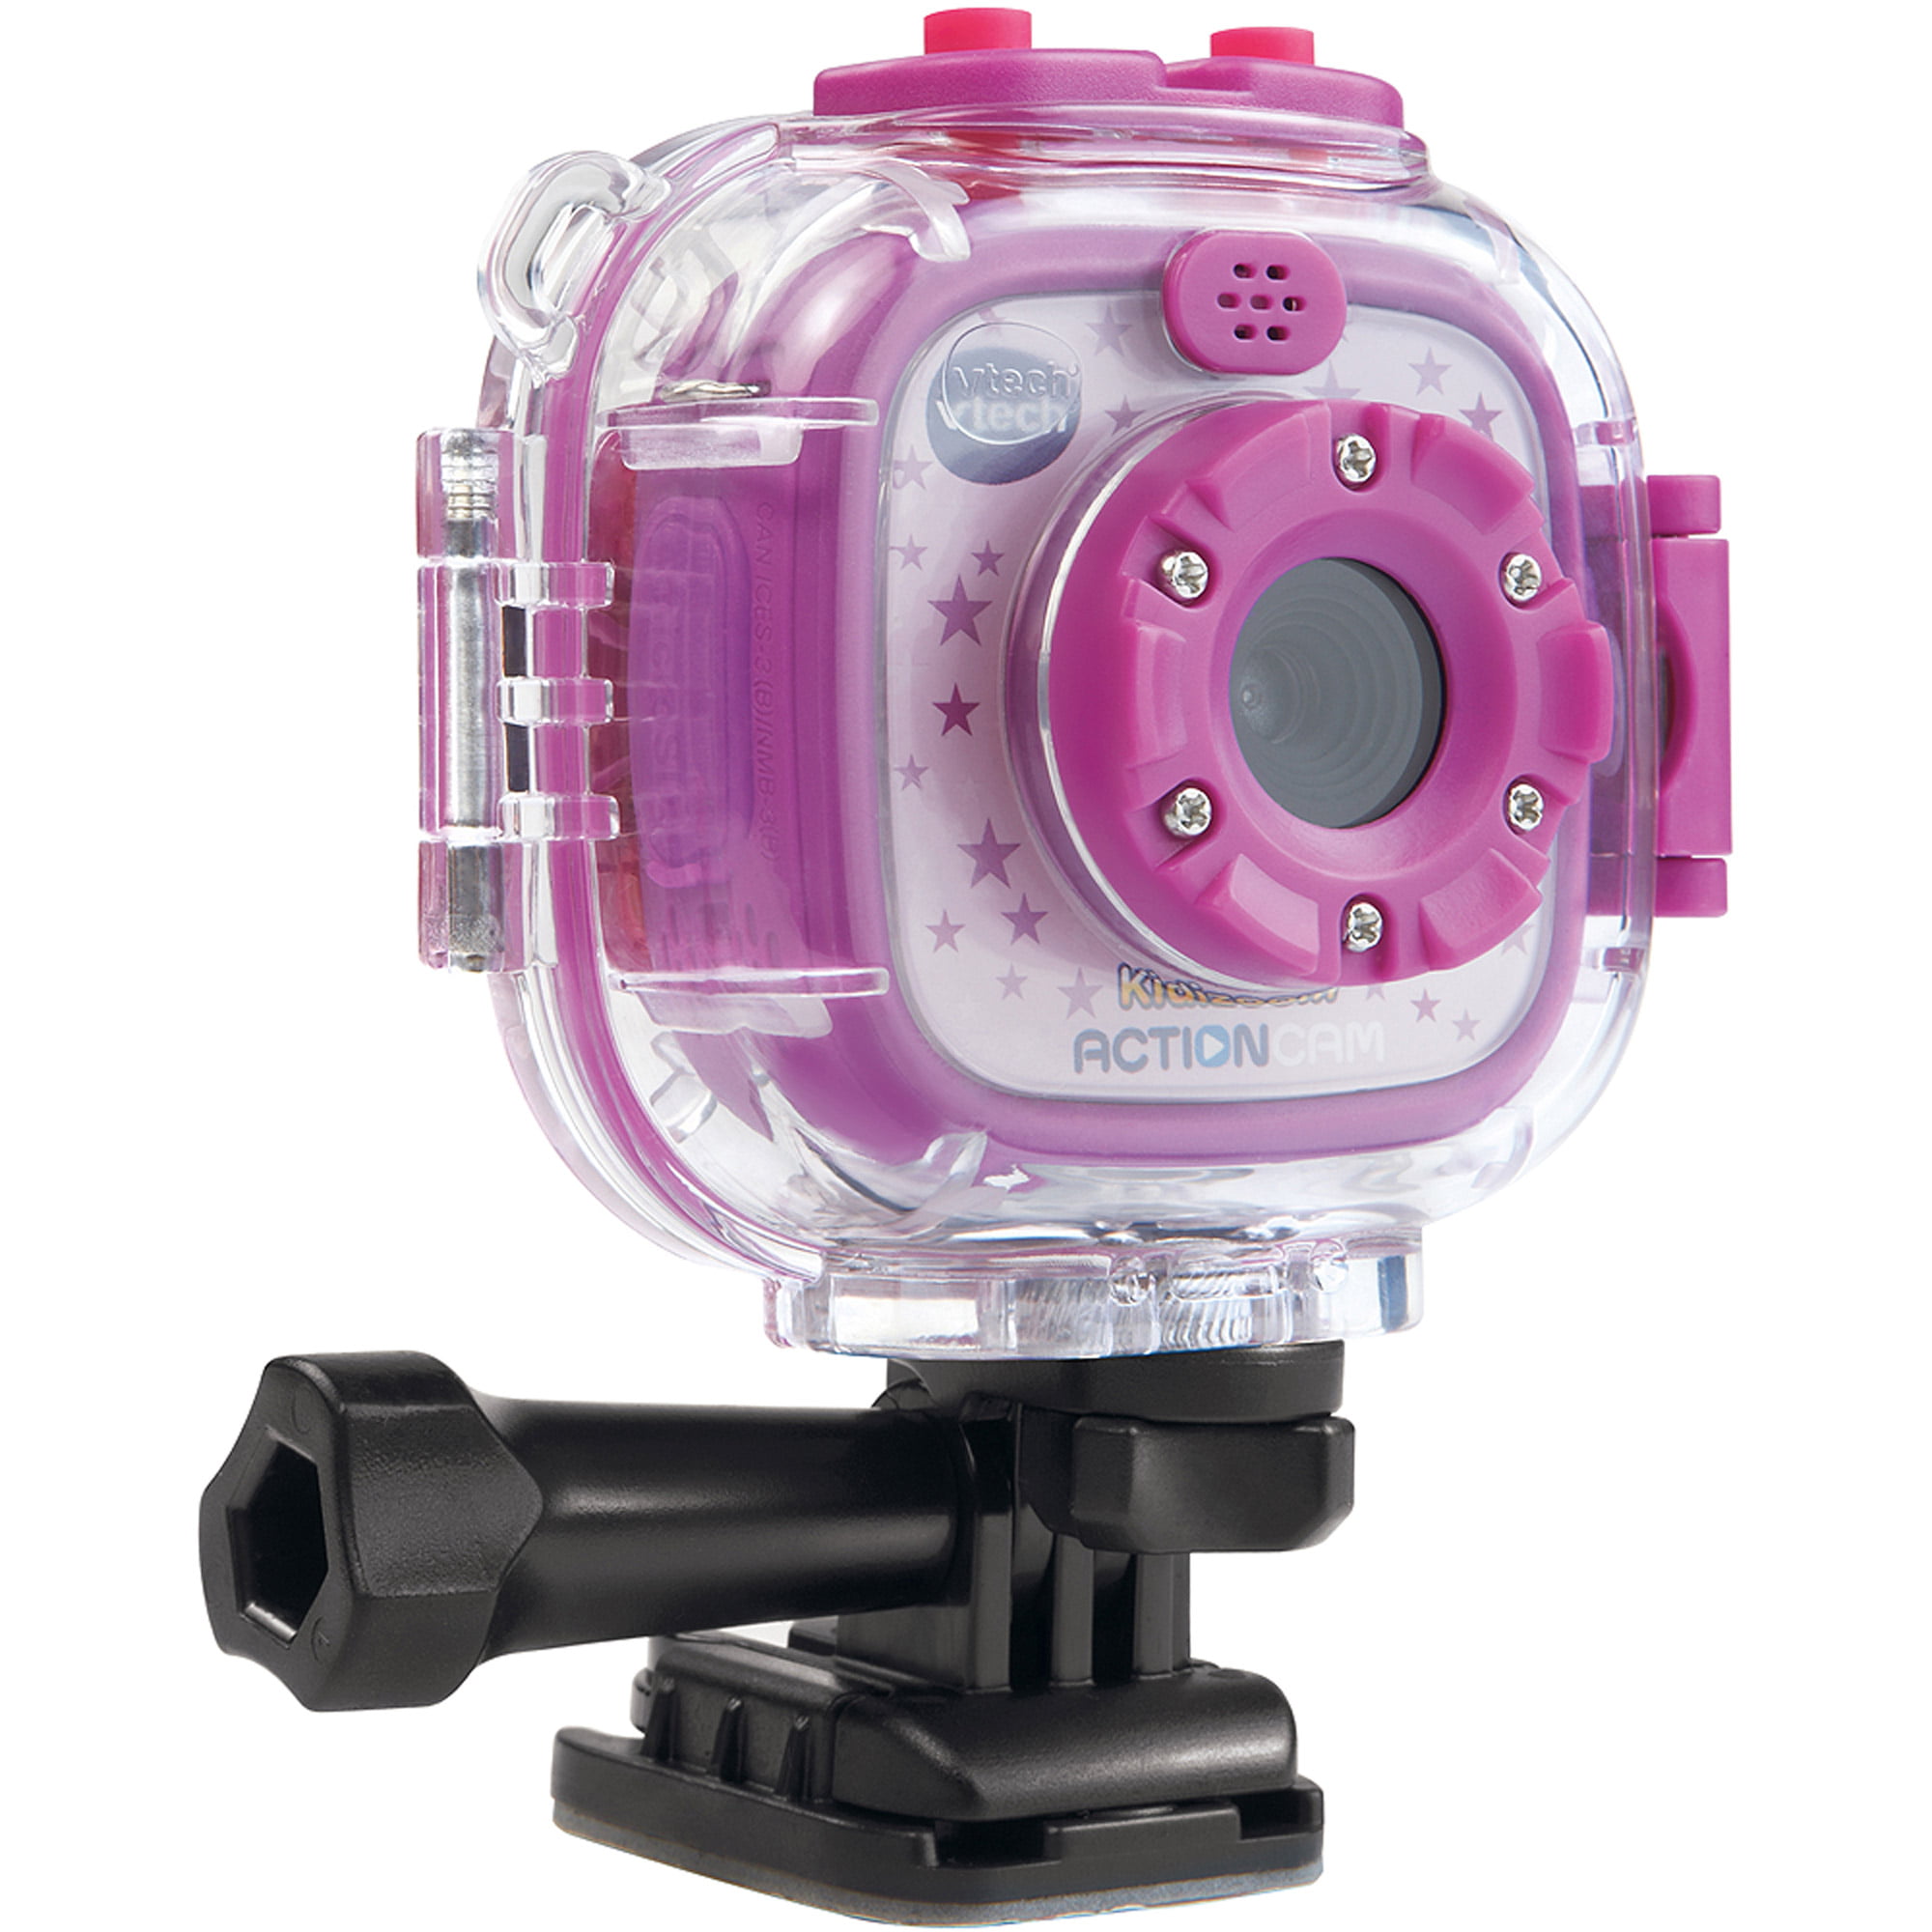 VTech Kidizoom Action Cam, Yellow, 480p